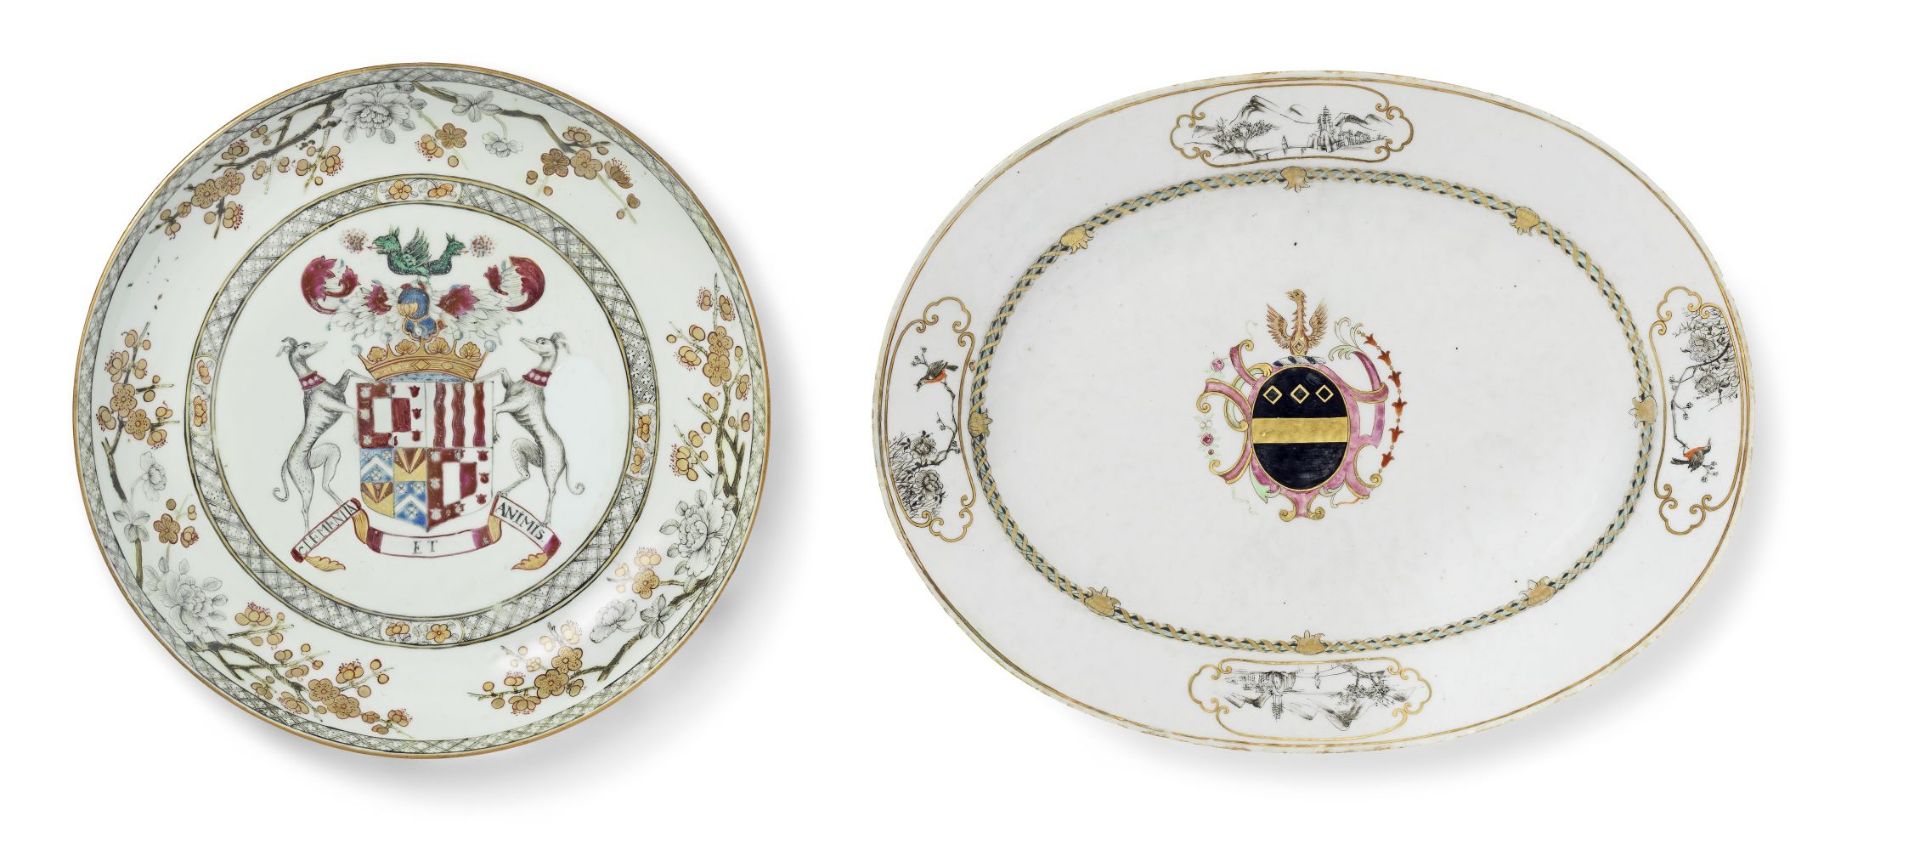 A CHINESE EXPORT ARMORIAL PORCELAIN PLATE AND AN OVAL DISH Circa 1744 and 1750 (2)